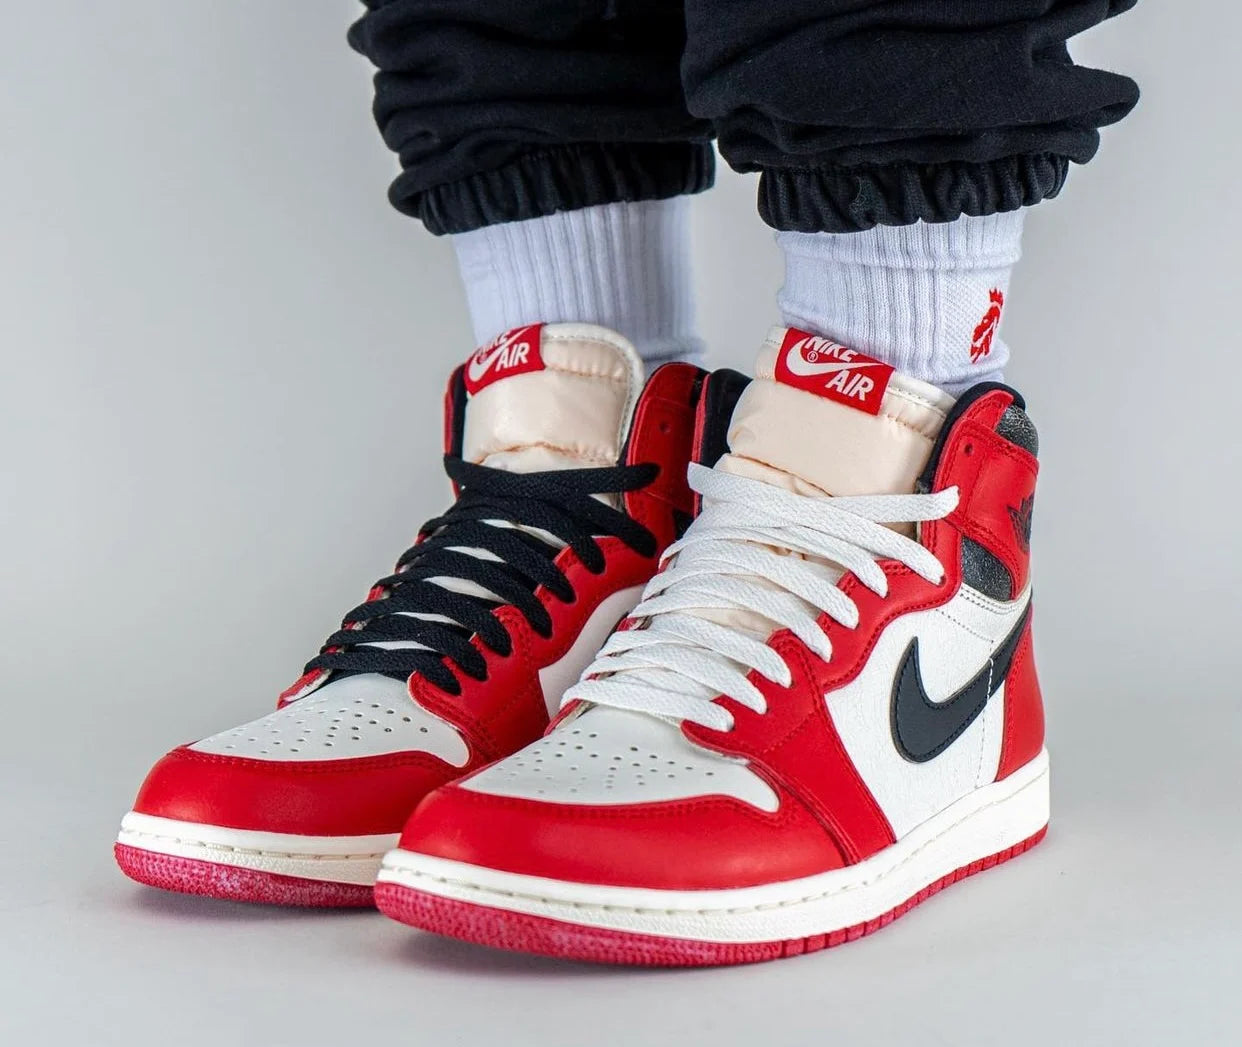 Air Jordan 1 Lost and Found Chicago 22 Release Date + First Look